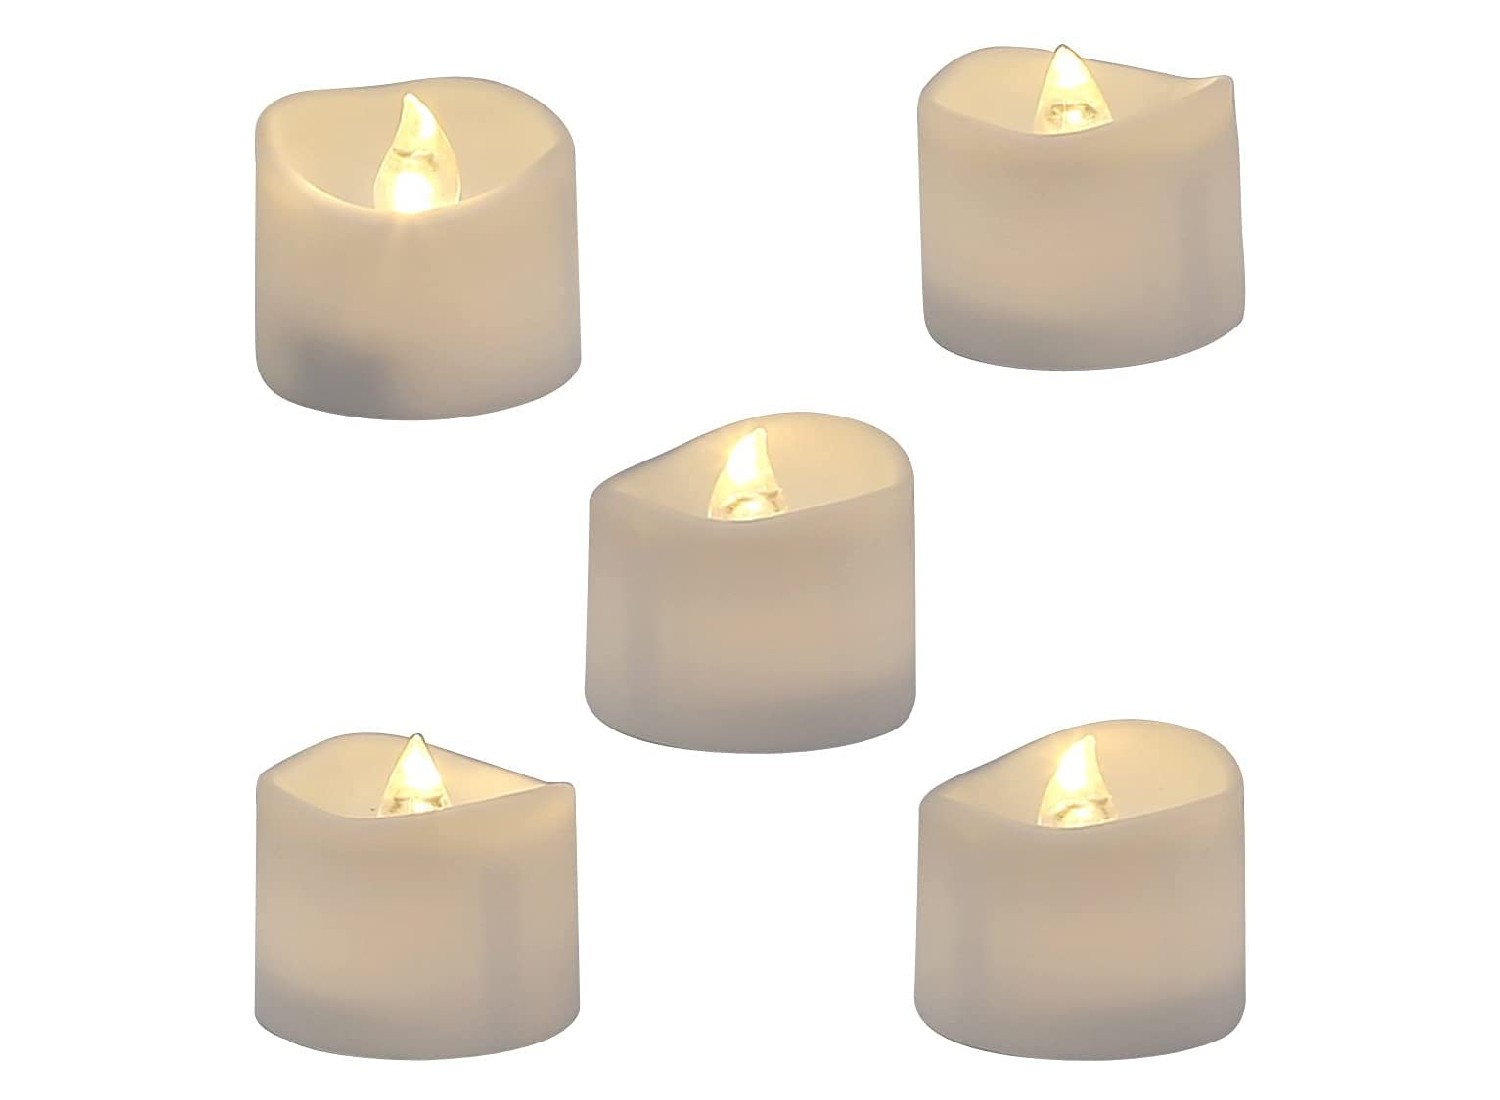 What Are The Most Realistic Flameless Candles?